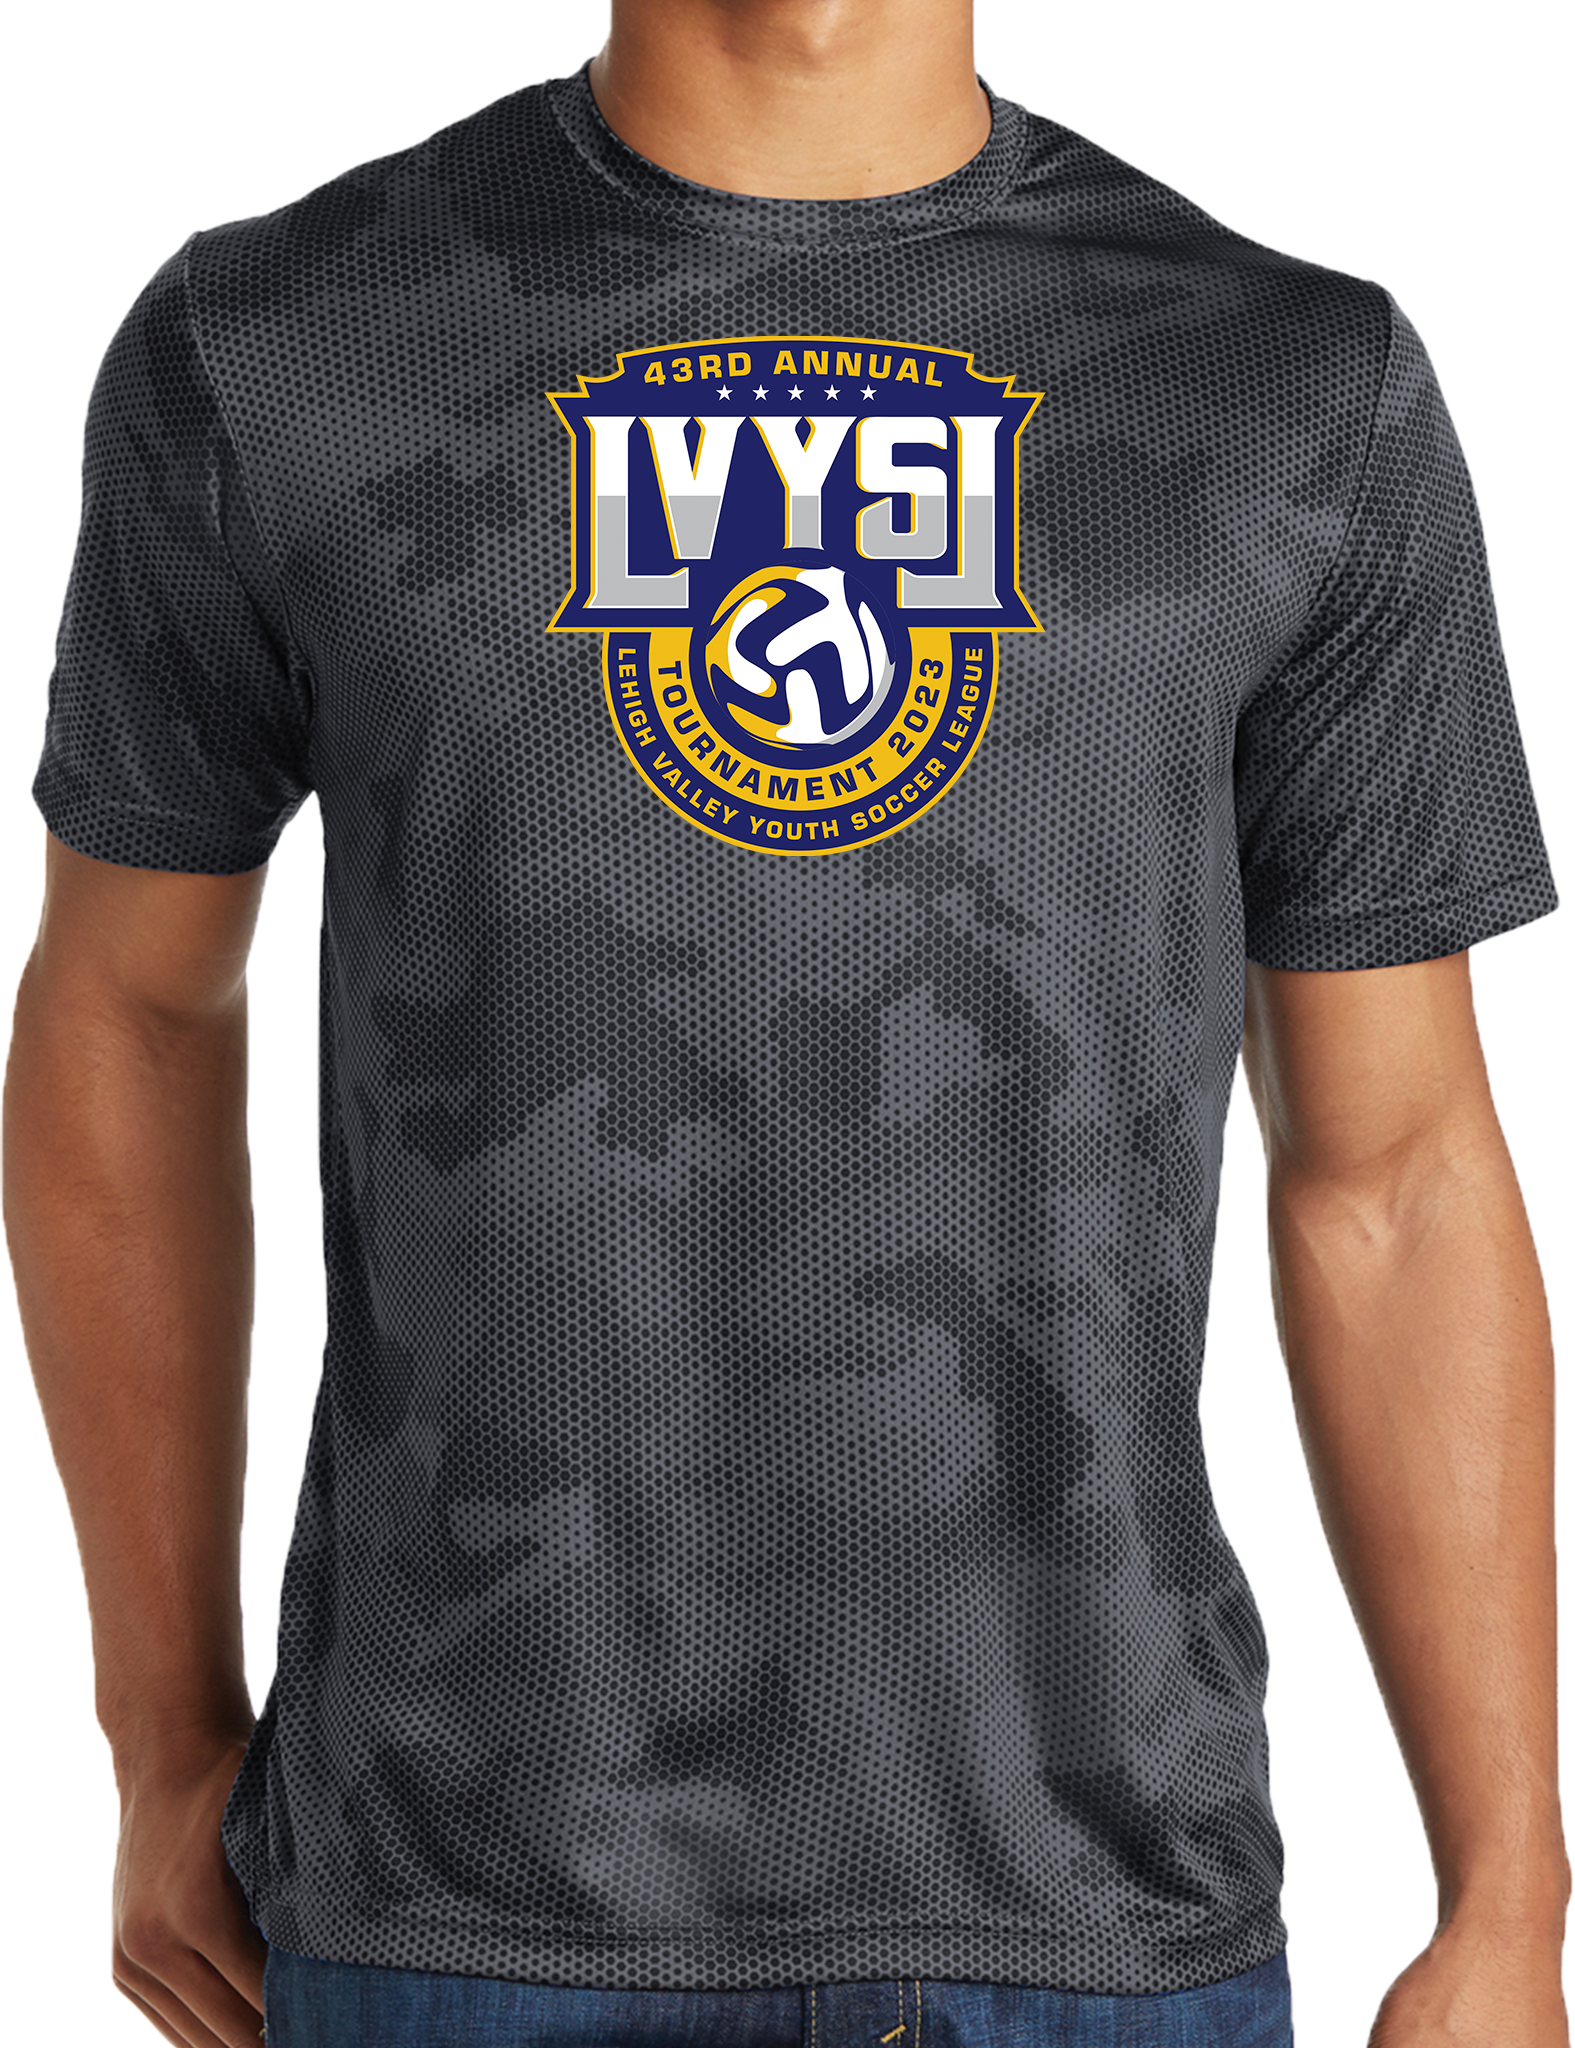 PERFORMANCE SHIRTS - 2023 43rd annual Lehigh Valley Youth Soccer League Tournament